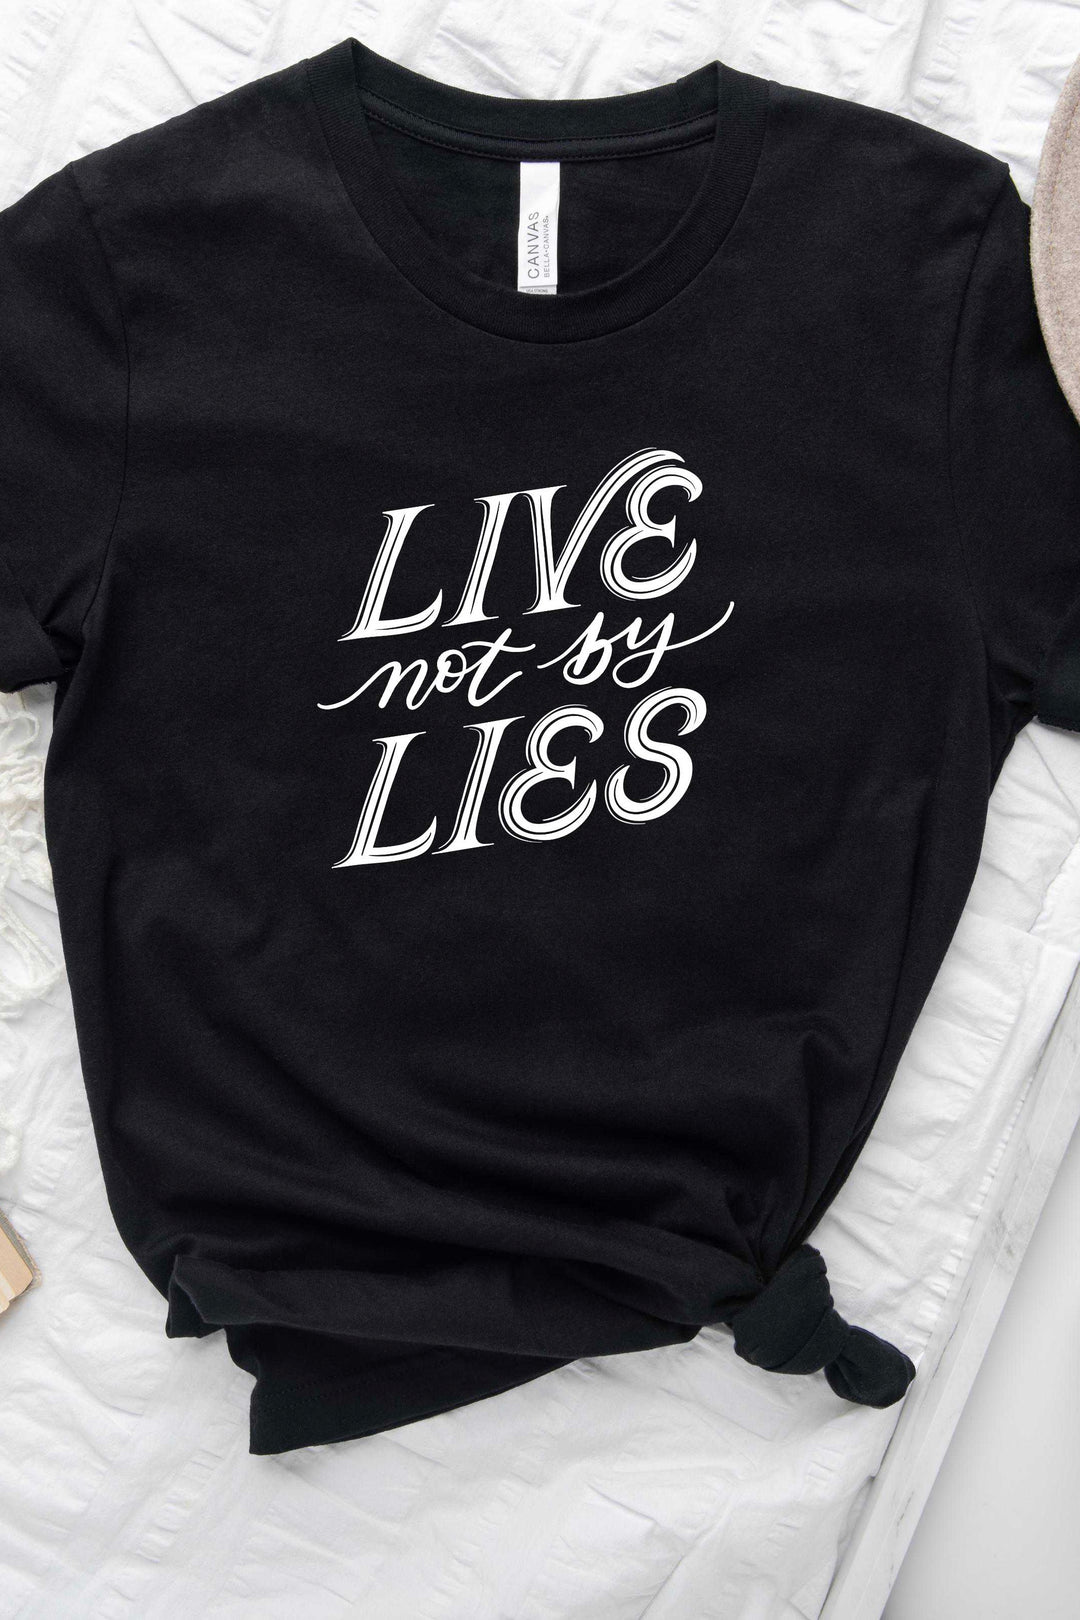 "Live Not by Lies" Tee